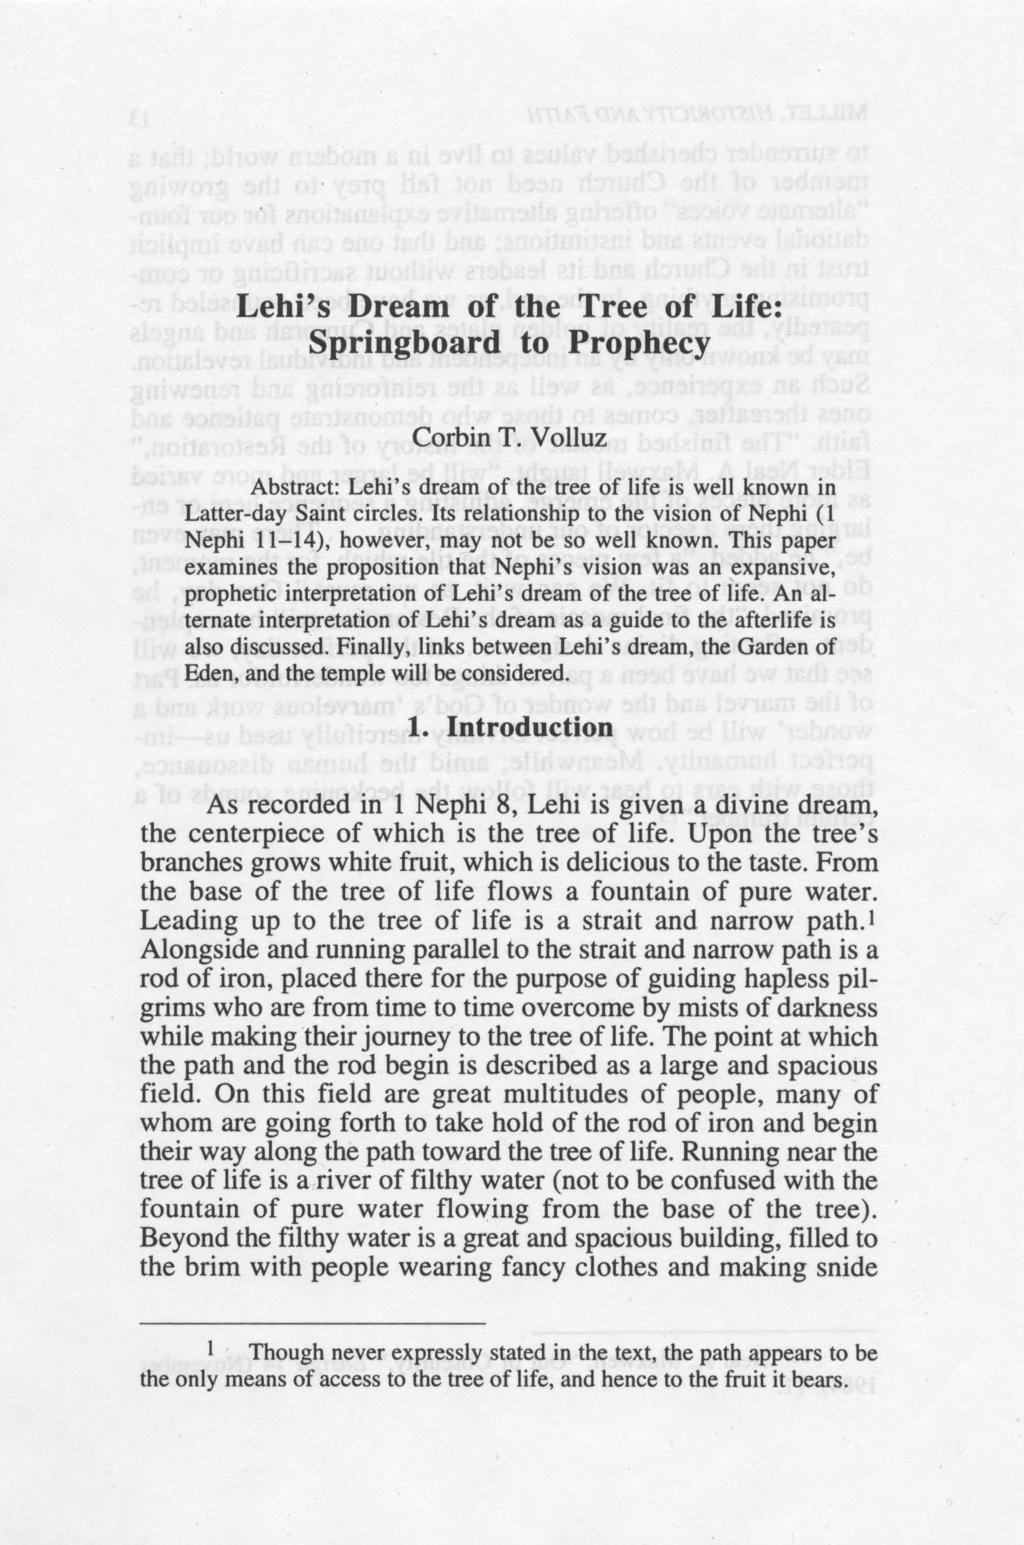 Lehi's Dream of the Tree of Life: Springboard to Prophecy Corbin T. Volluz Abstract: Lehi' s dream of the tree of life is well known in Latter-day Saint circles.